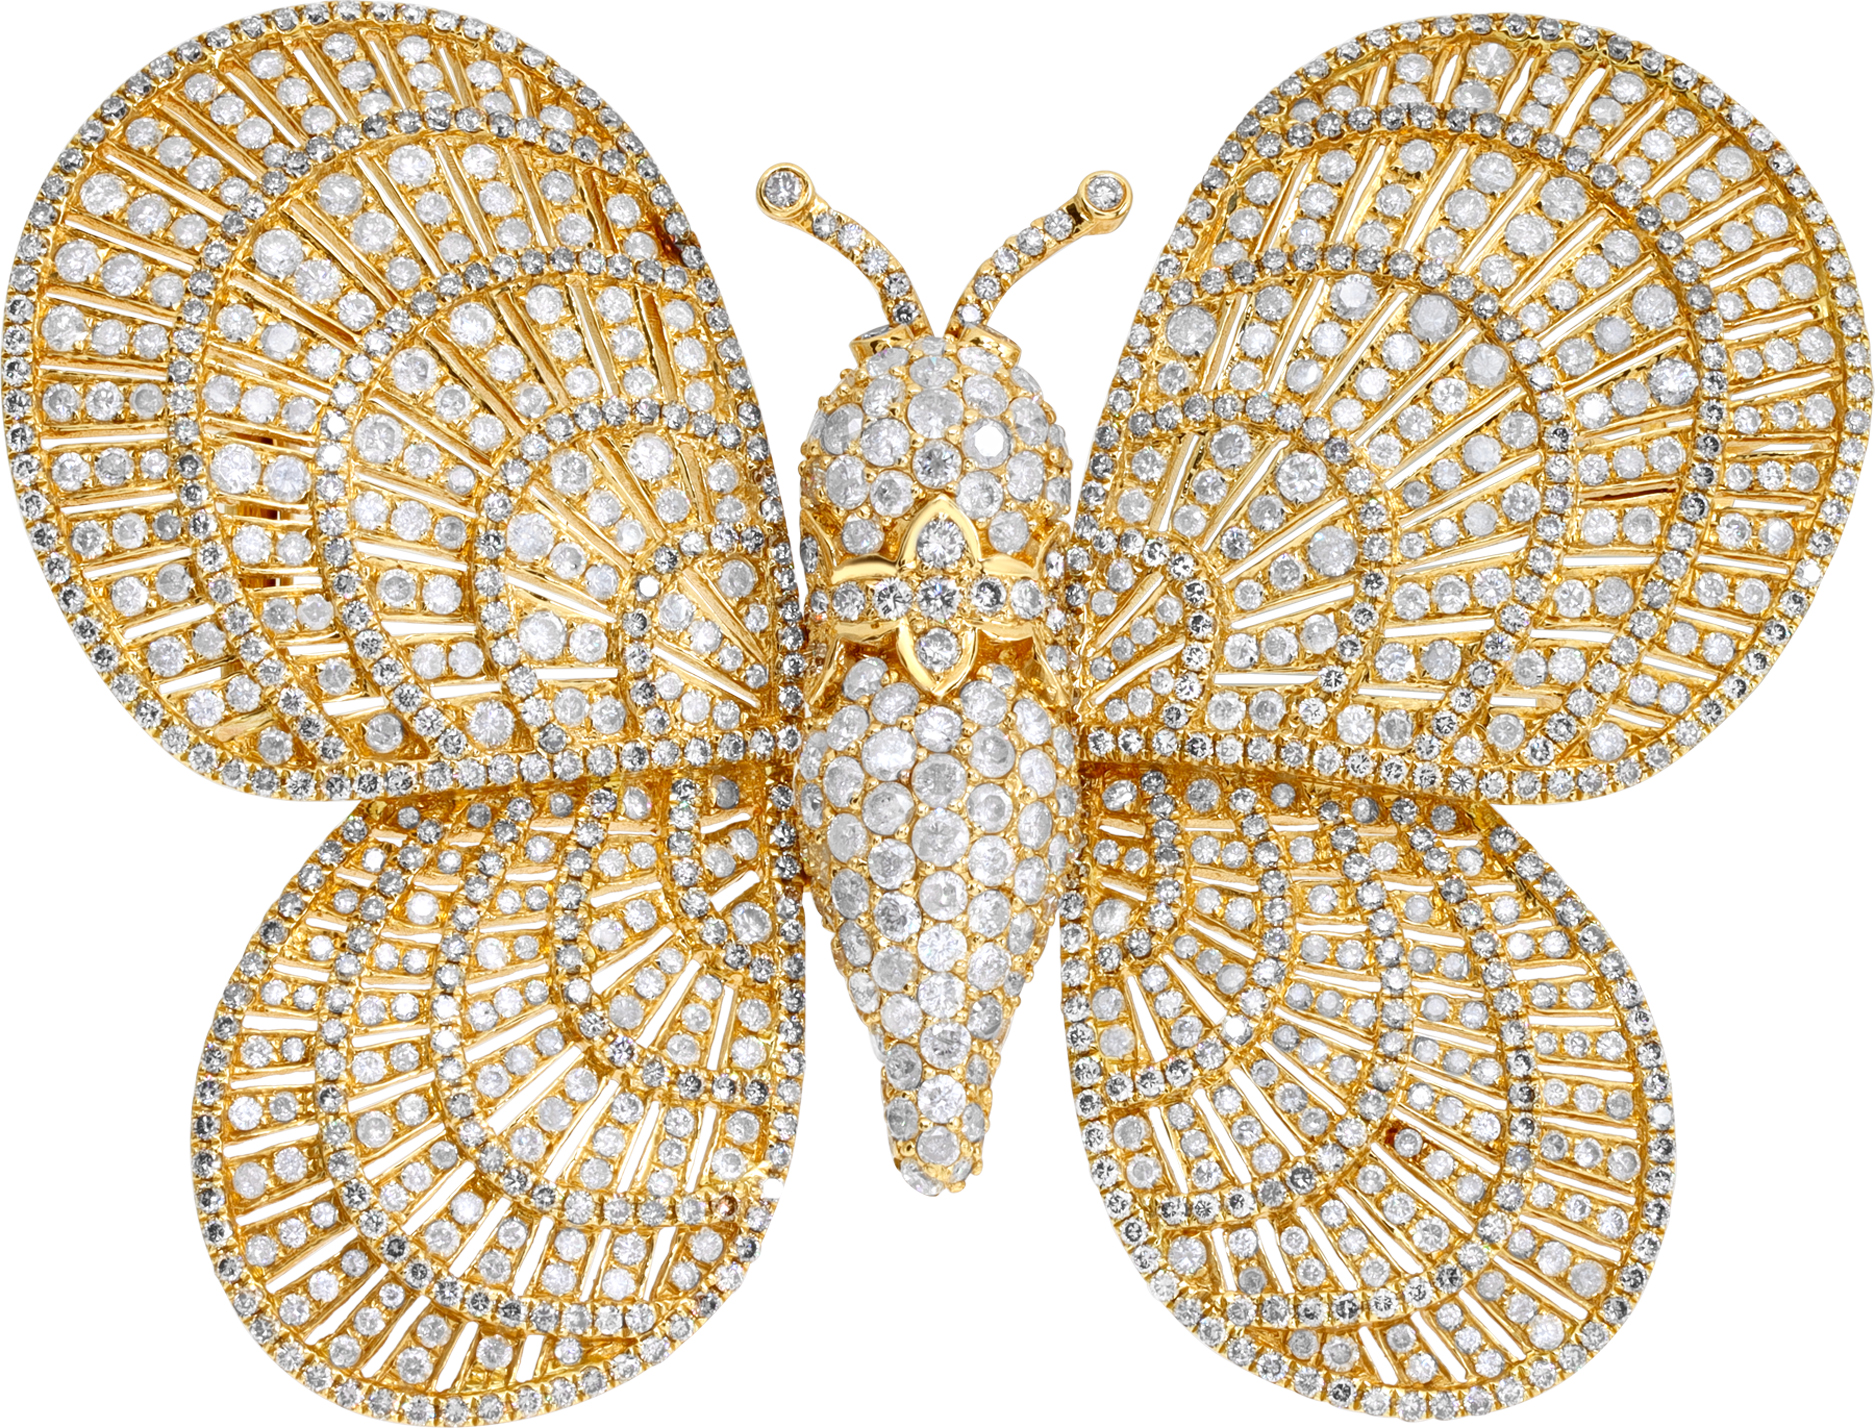 Pave diamond butterfly brooch in 18k yellow gold